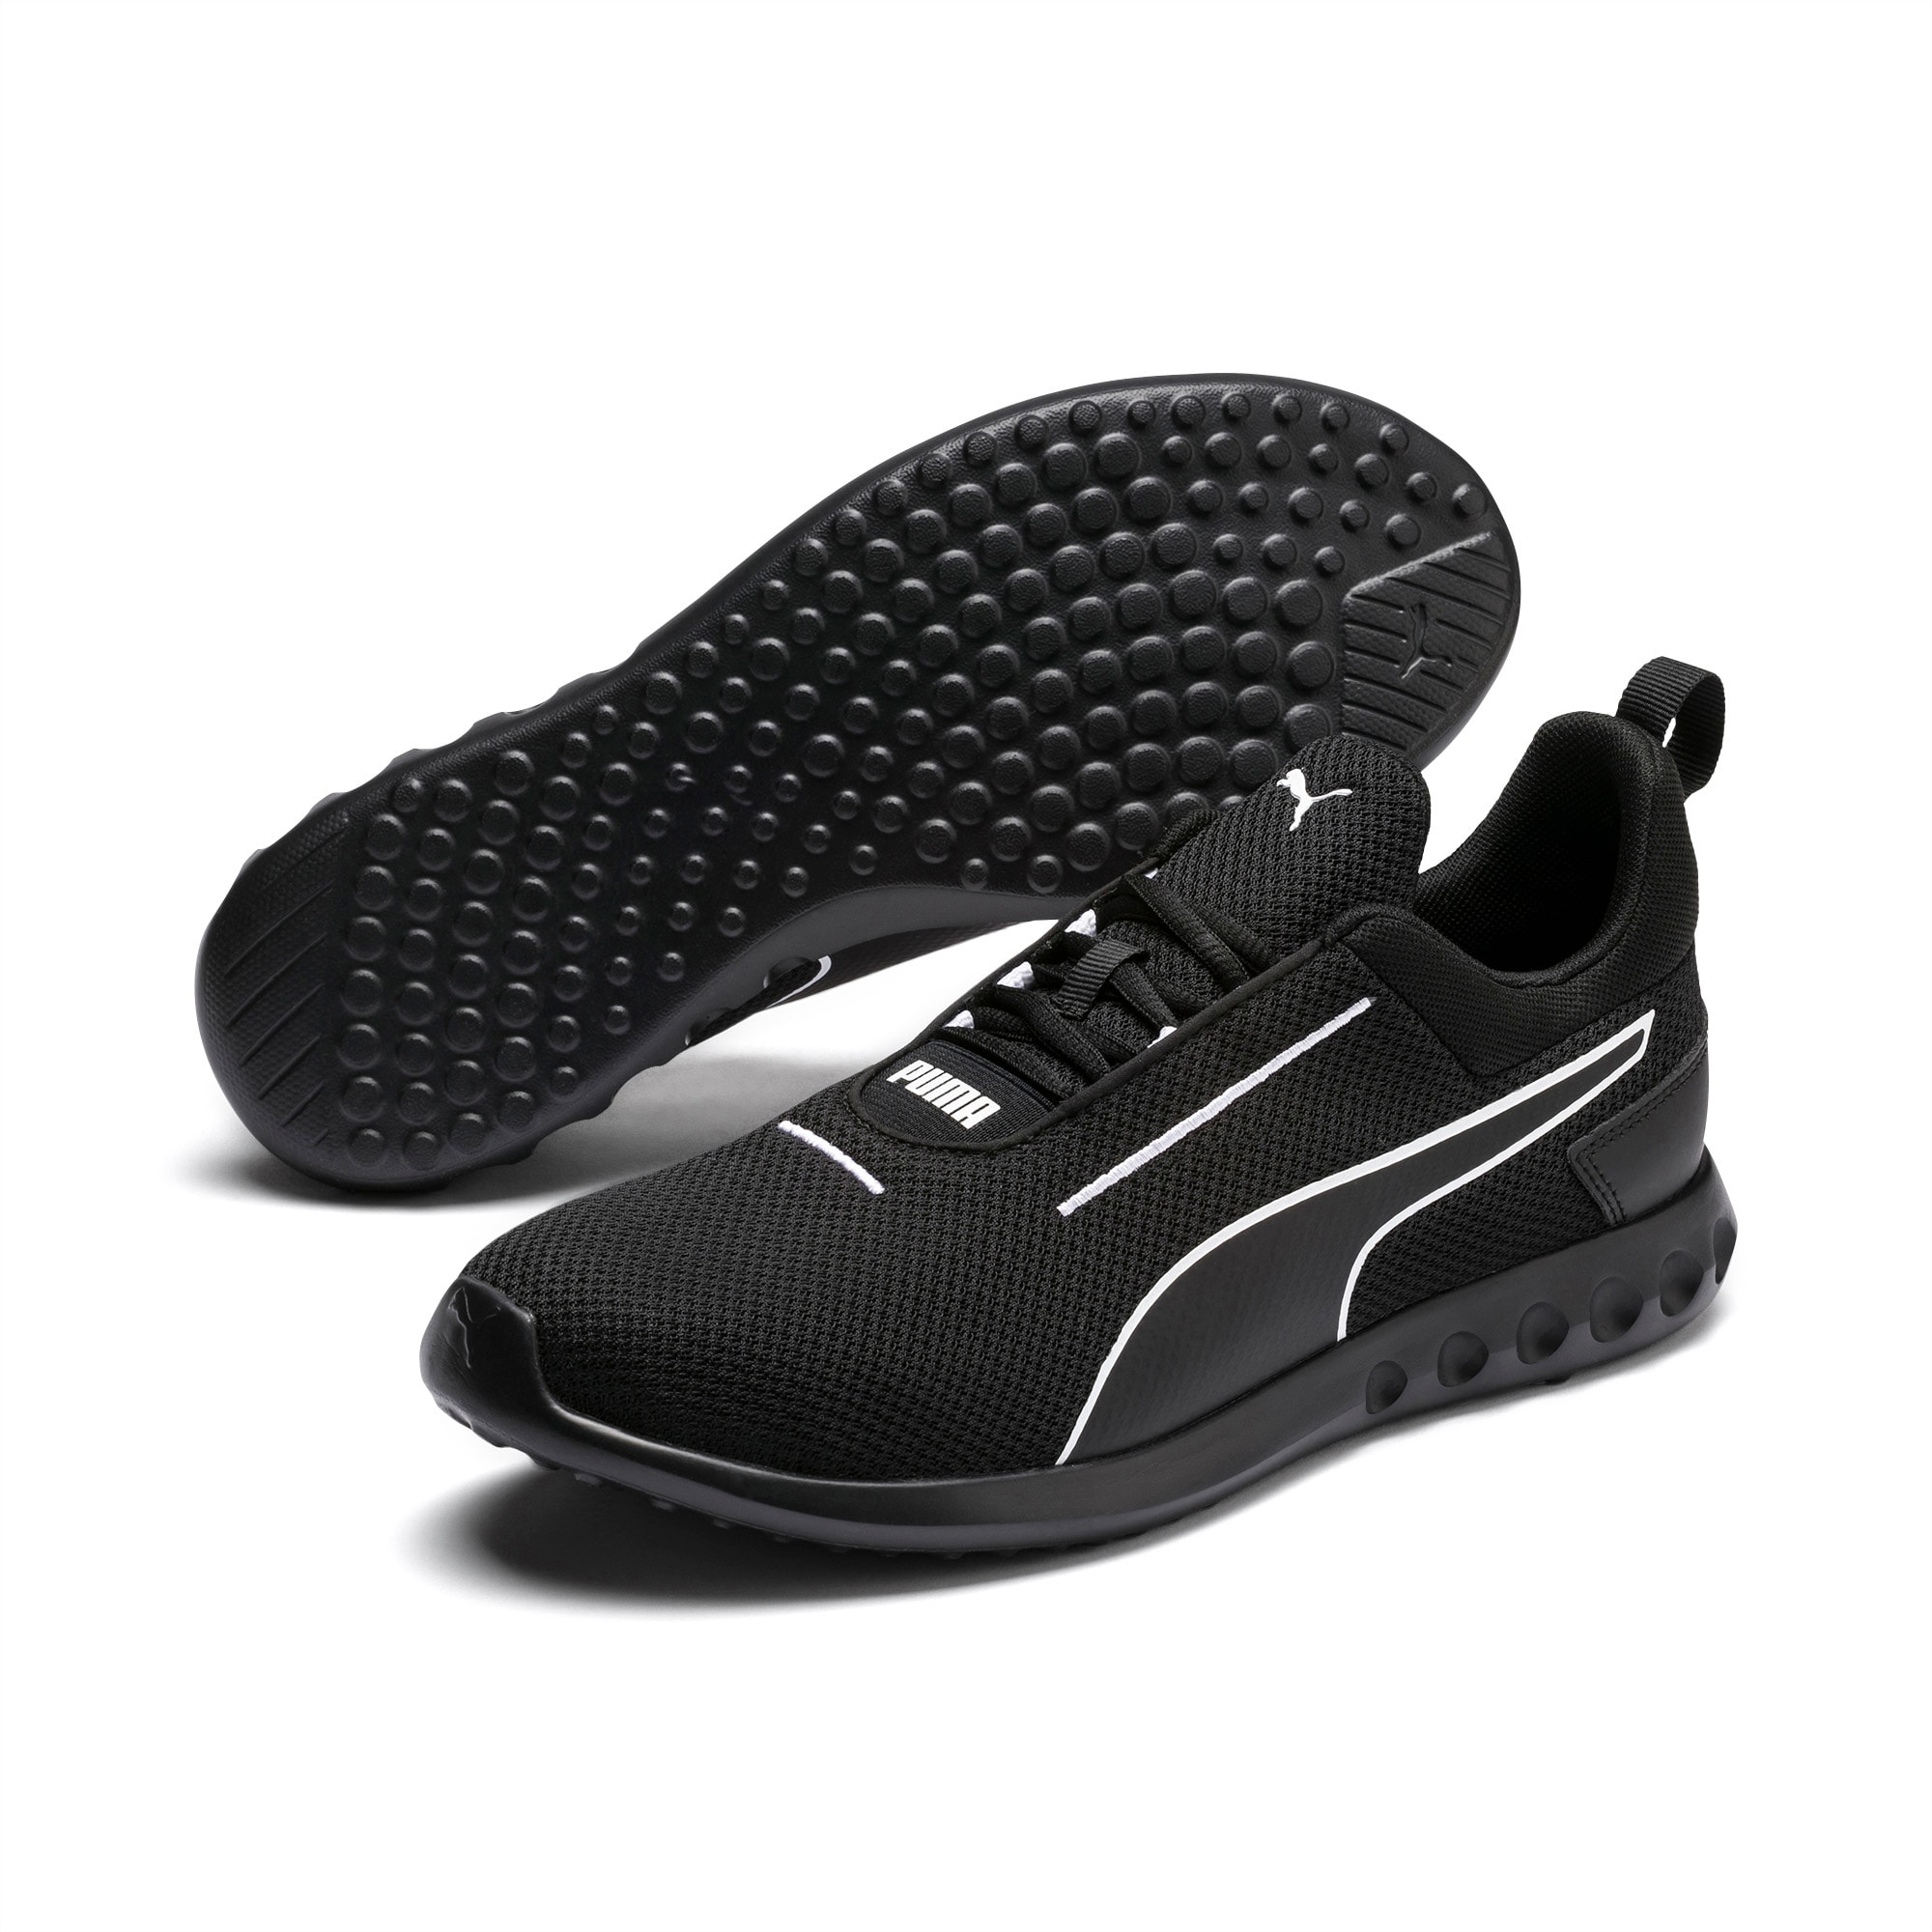 Carson 2 Concave Men's Running Shoes 